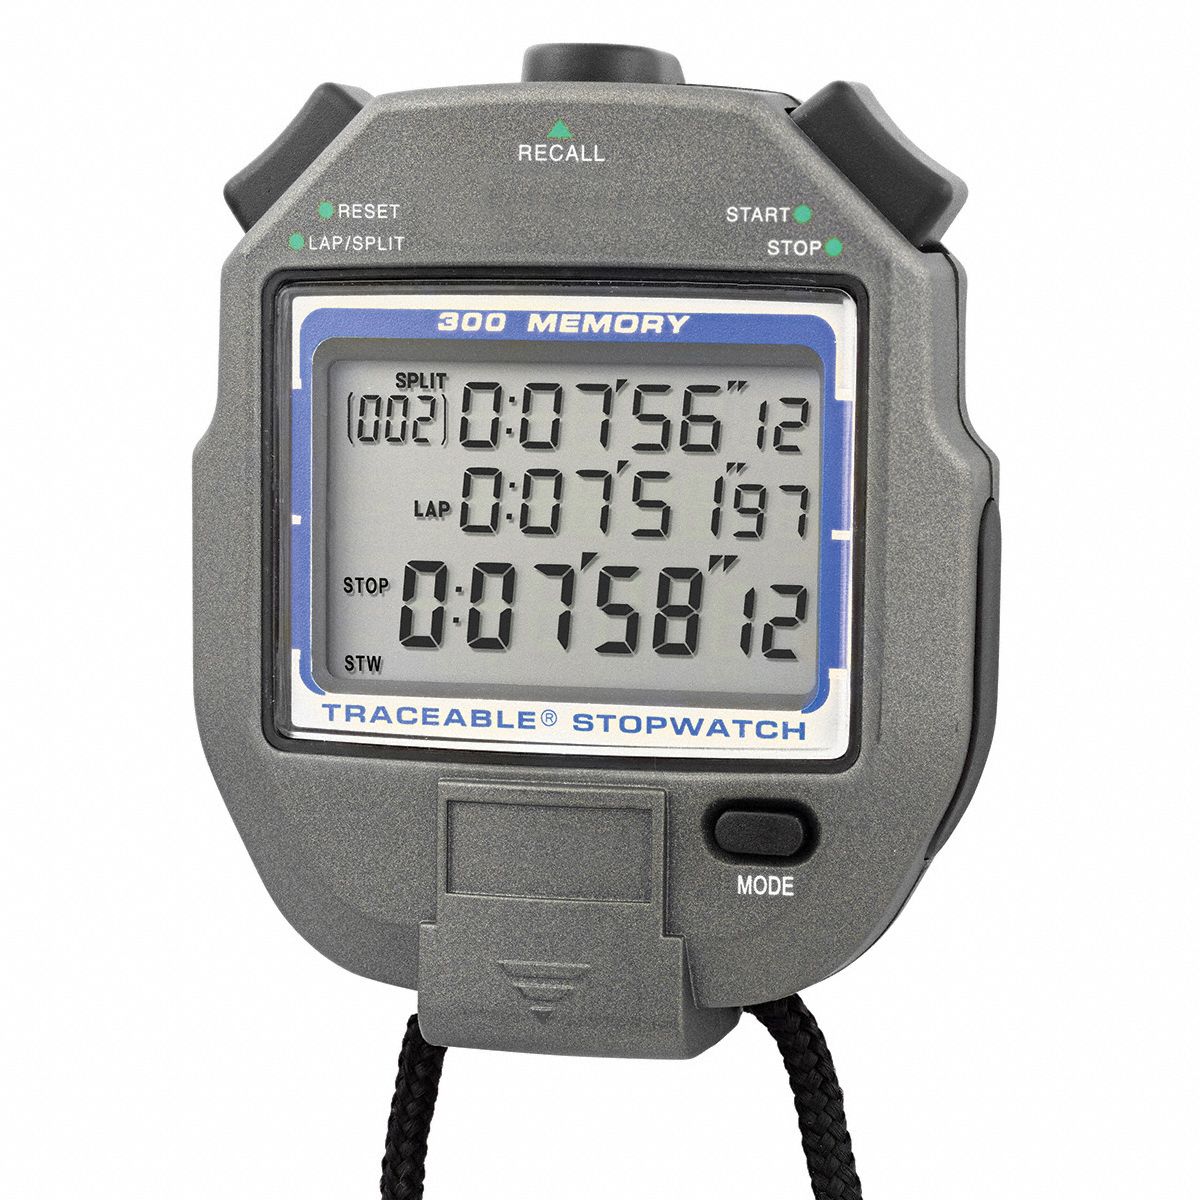 TRACEABLE Memory Stopwatch: Count up to 9 hours, 59 minutes, 59 seconds, 99  hundredths, 3-line LCD